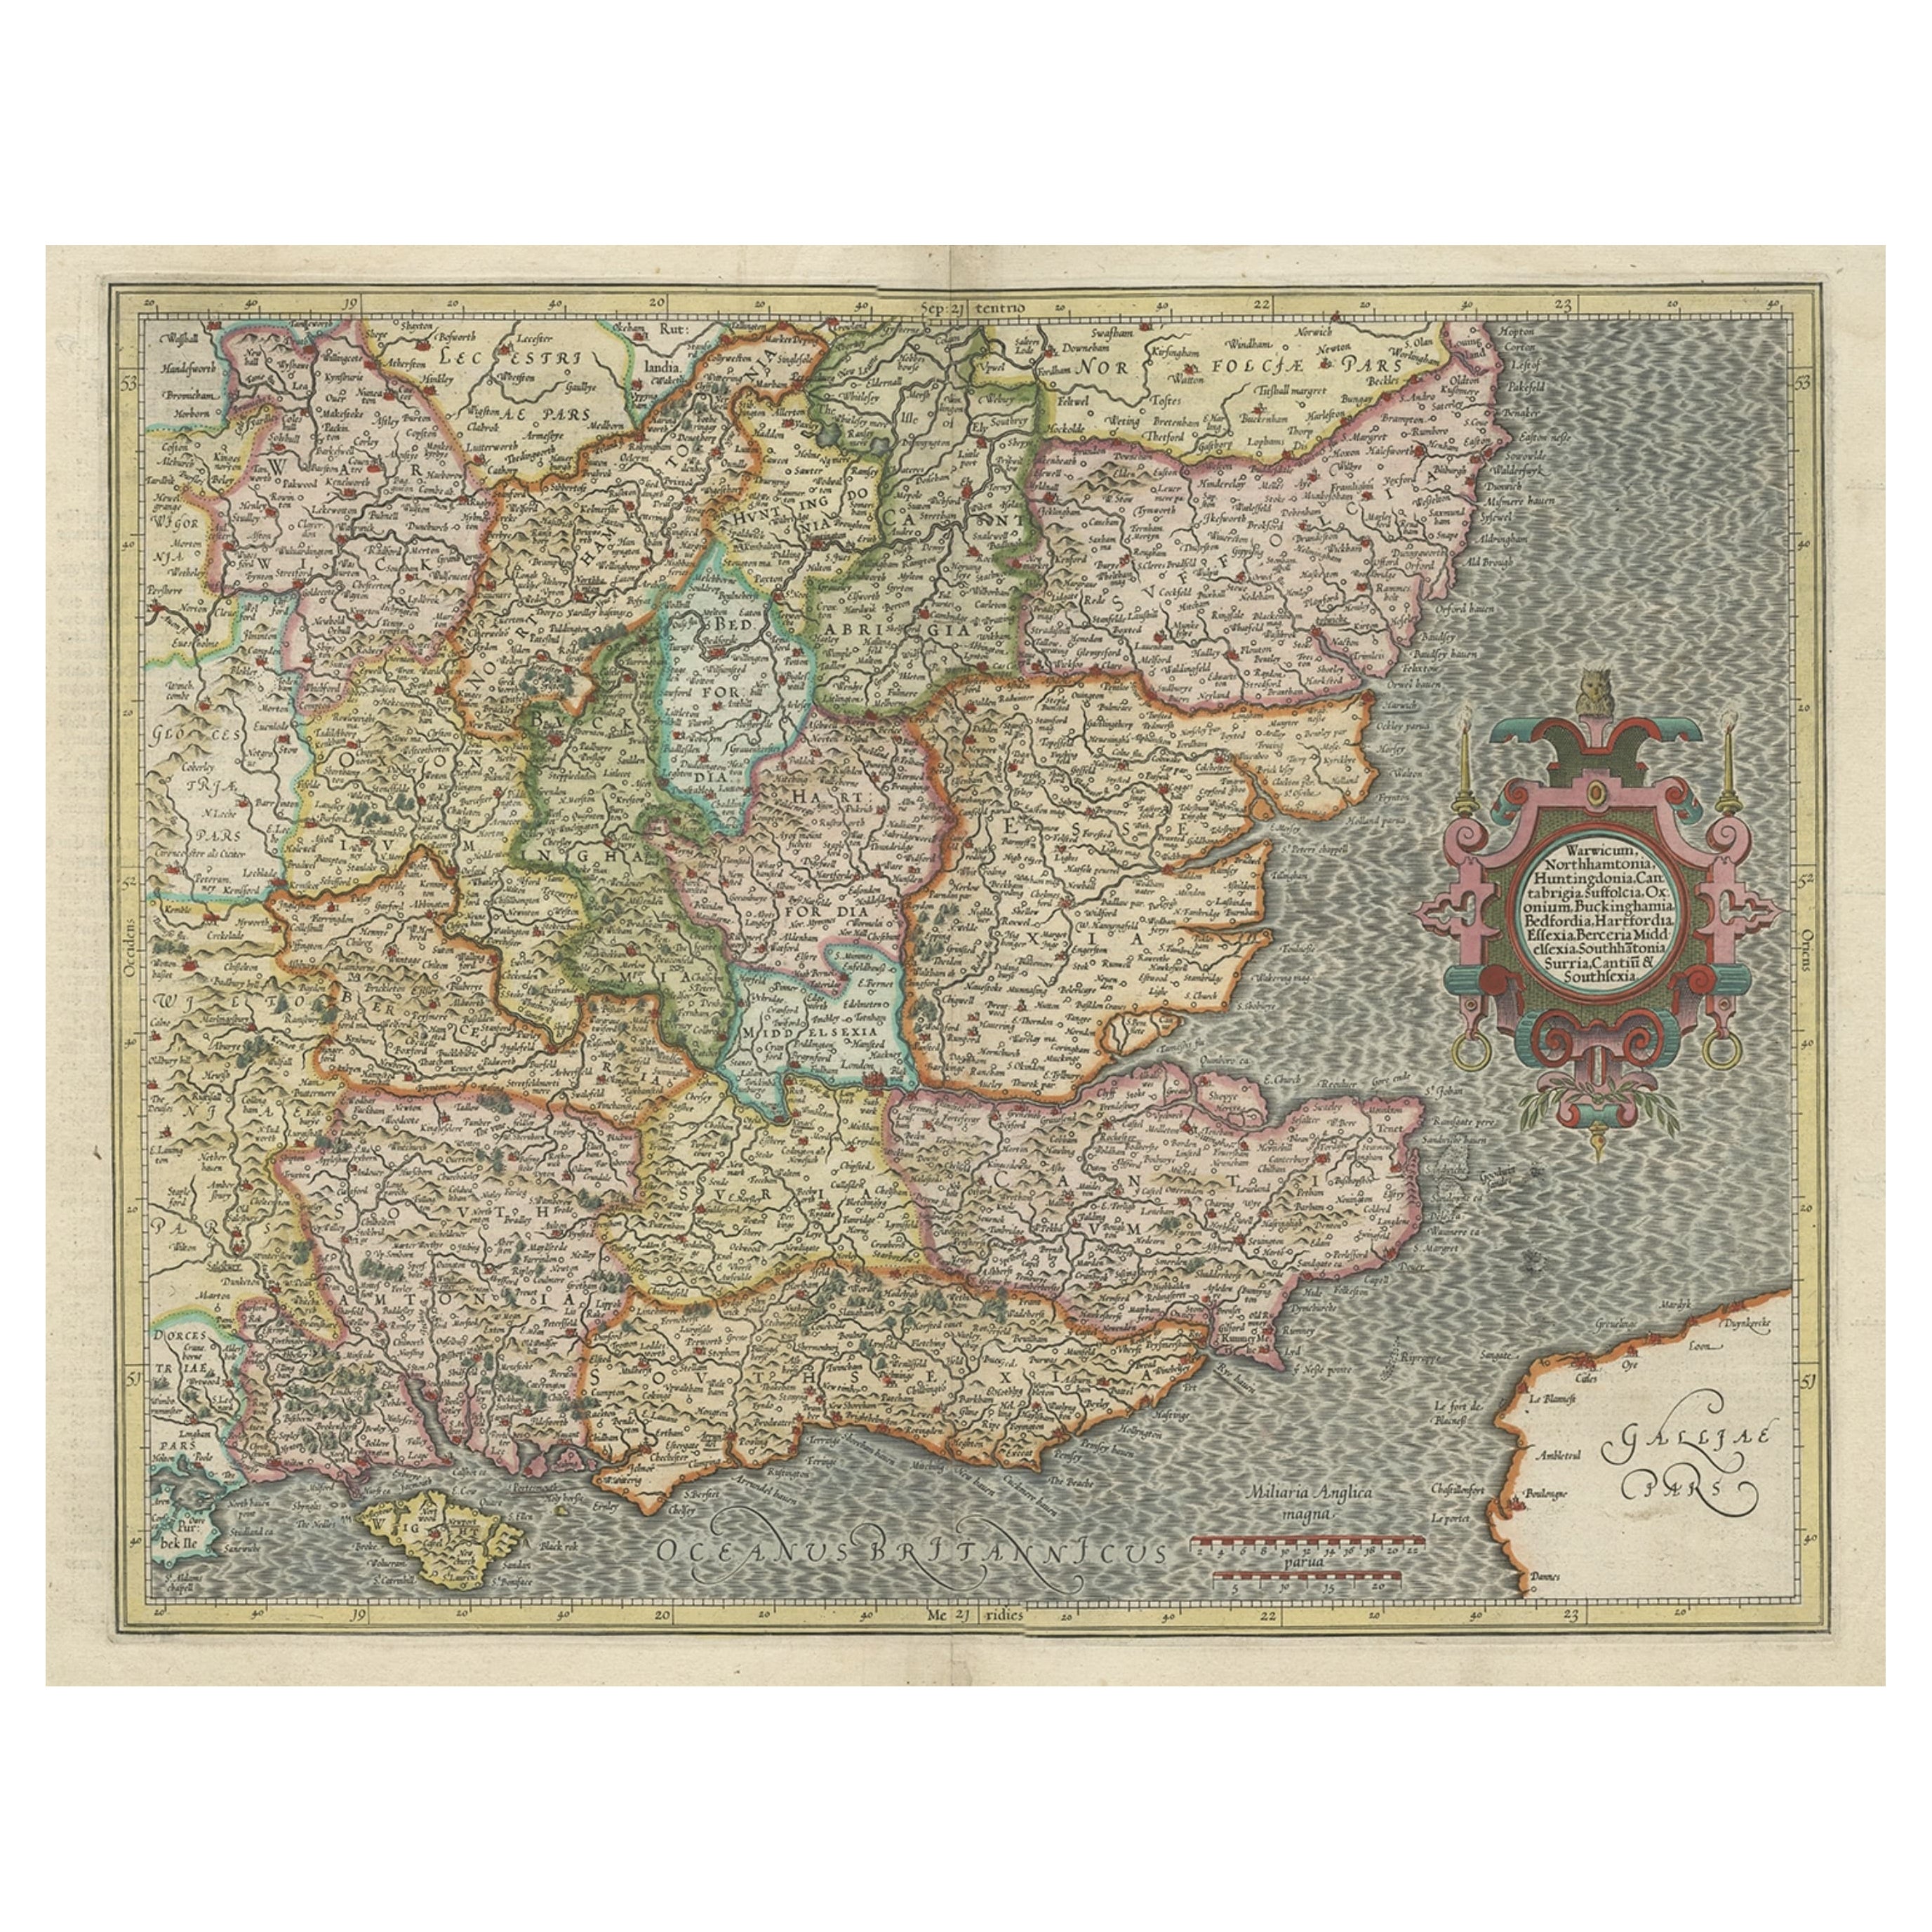 Original Old Map of South East England Incl London, Oxford, Cambridge, Etc, 1633